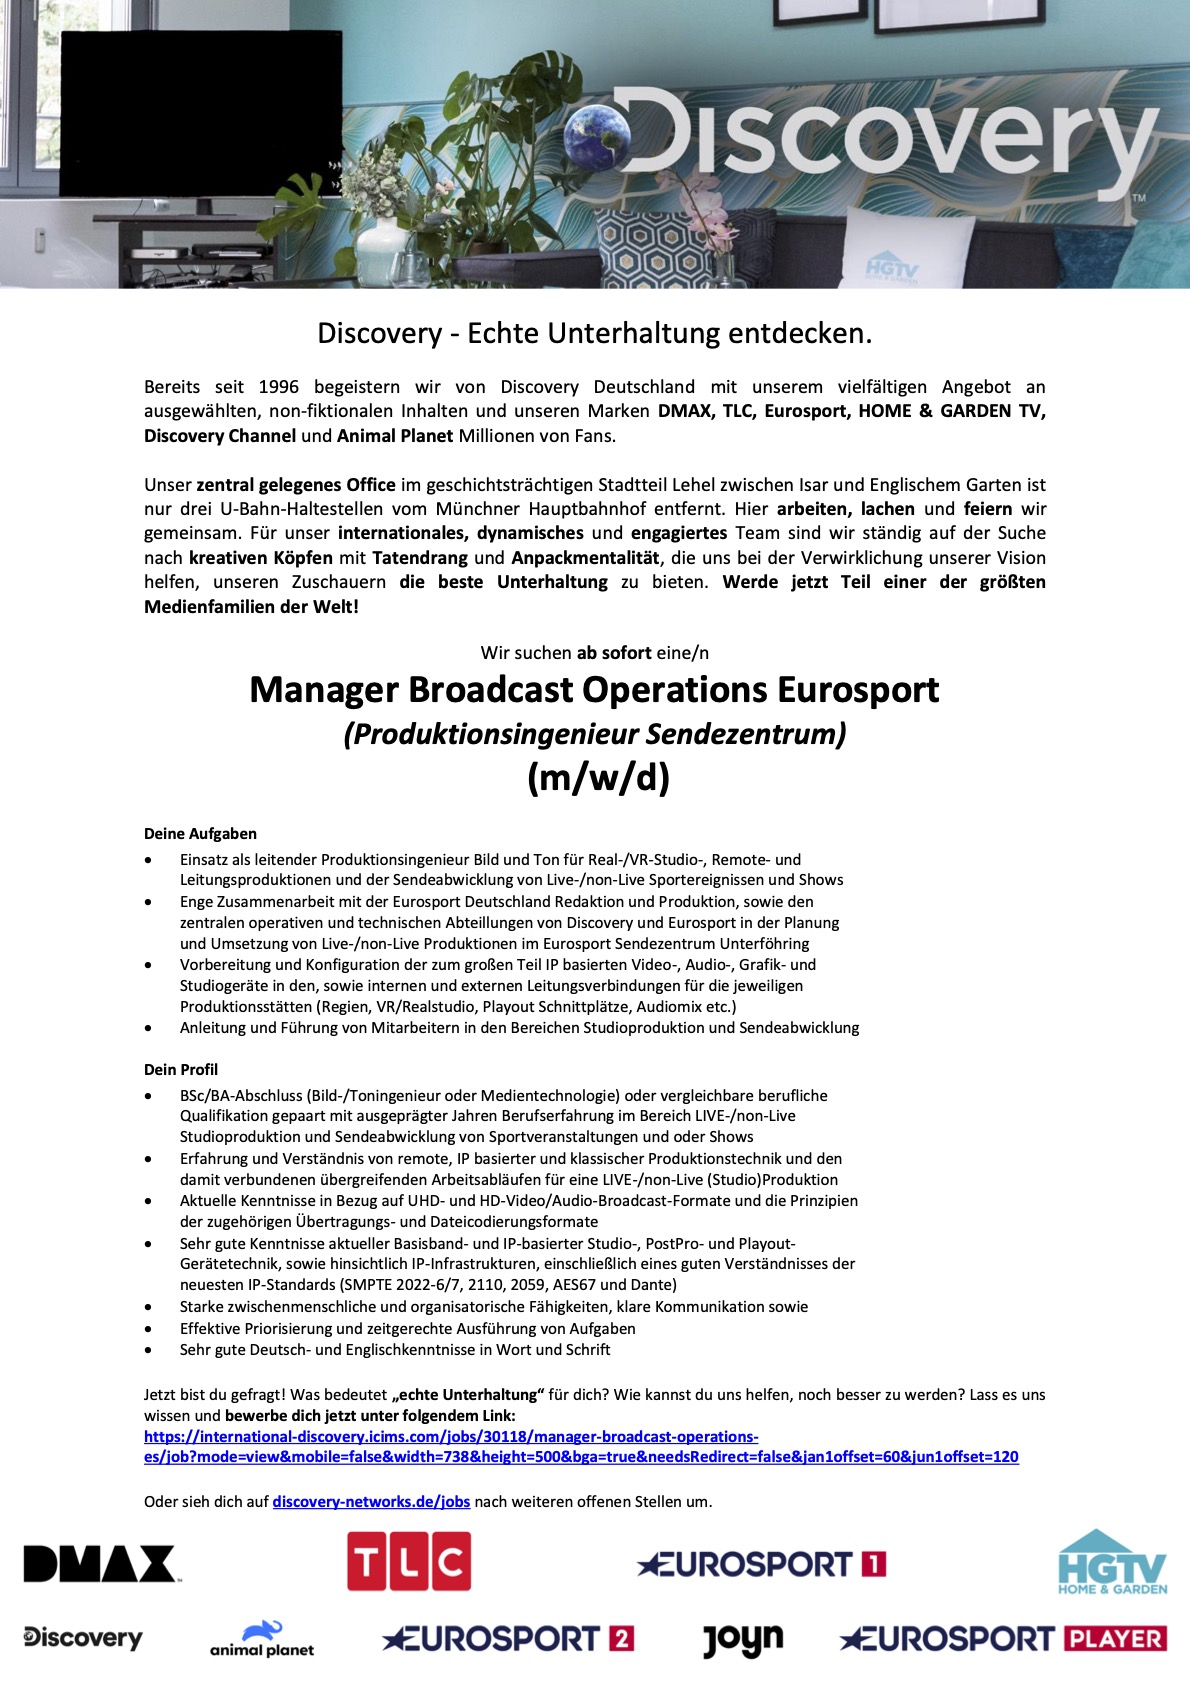 Manager Broadcast Operations Eurosport (m/w/d)